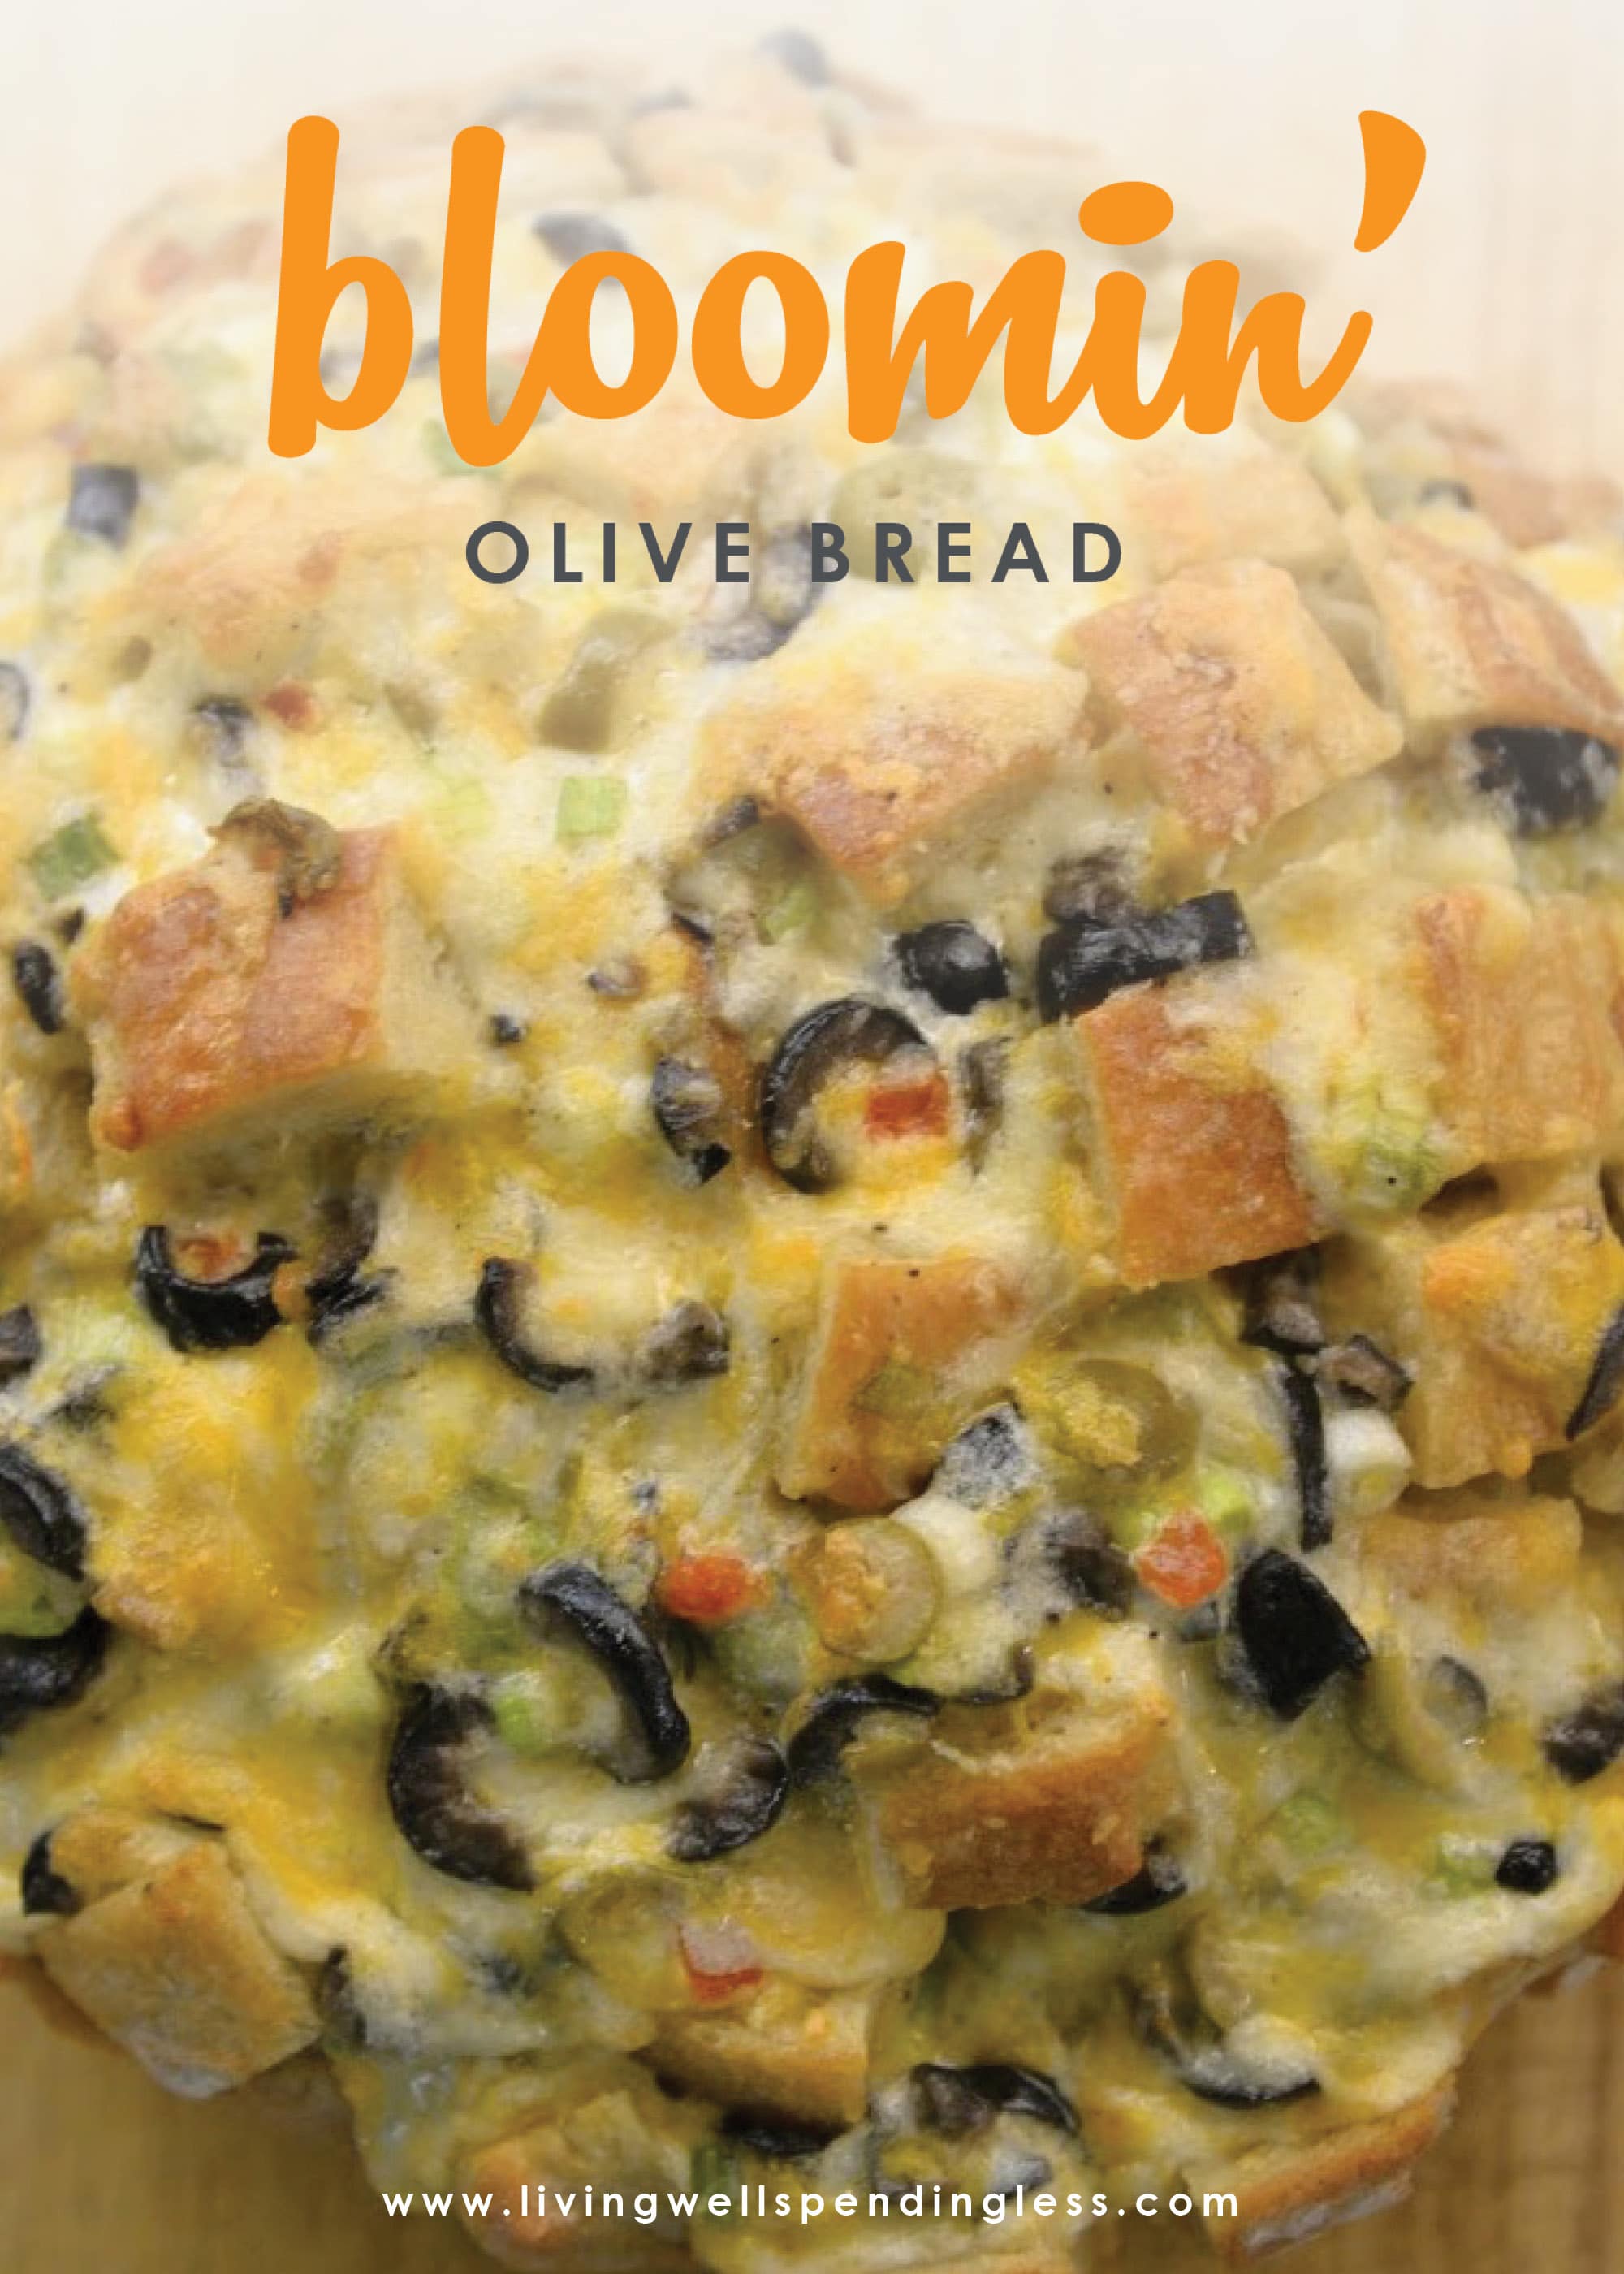 Love olives? This insanely delicious Bloomin' Olive Bread is pretty much just a party for your mouth. Filled with gooey melted cheese, fresh green onions, and flavor-packed olives, it is the quick & easy side dish guaranteed to steal the show! Makes a great appetizer too!